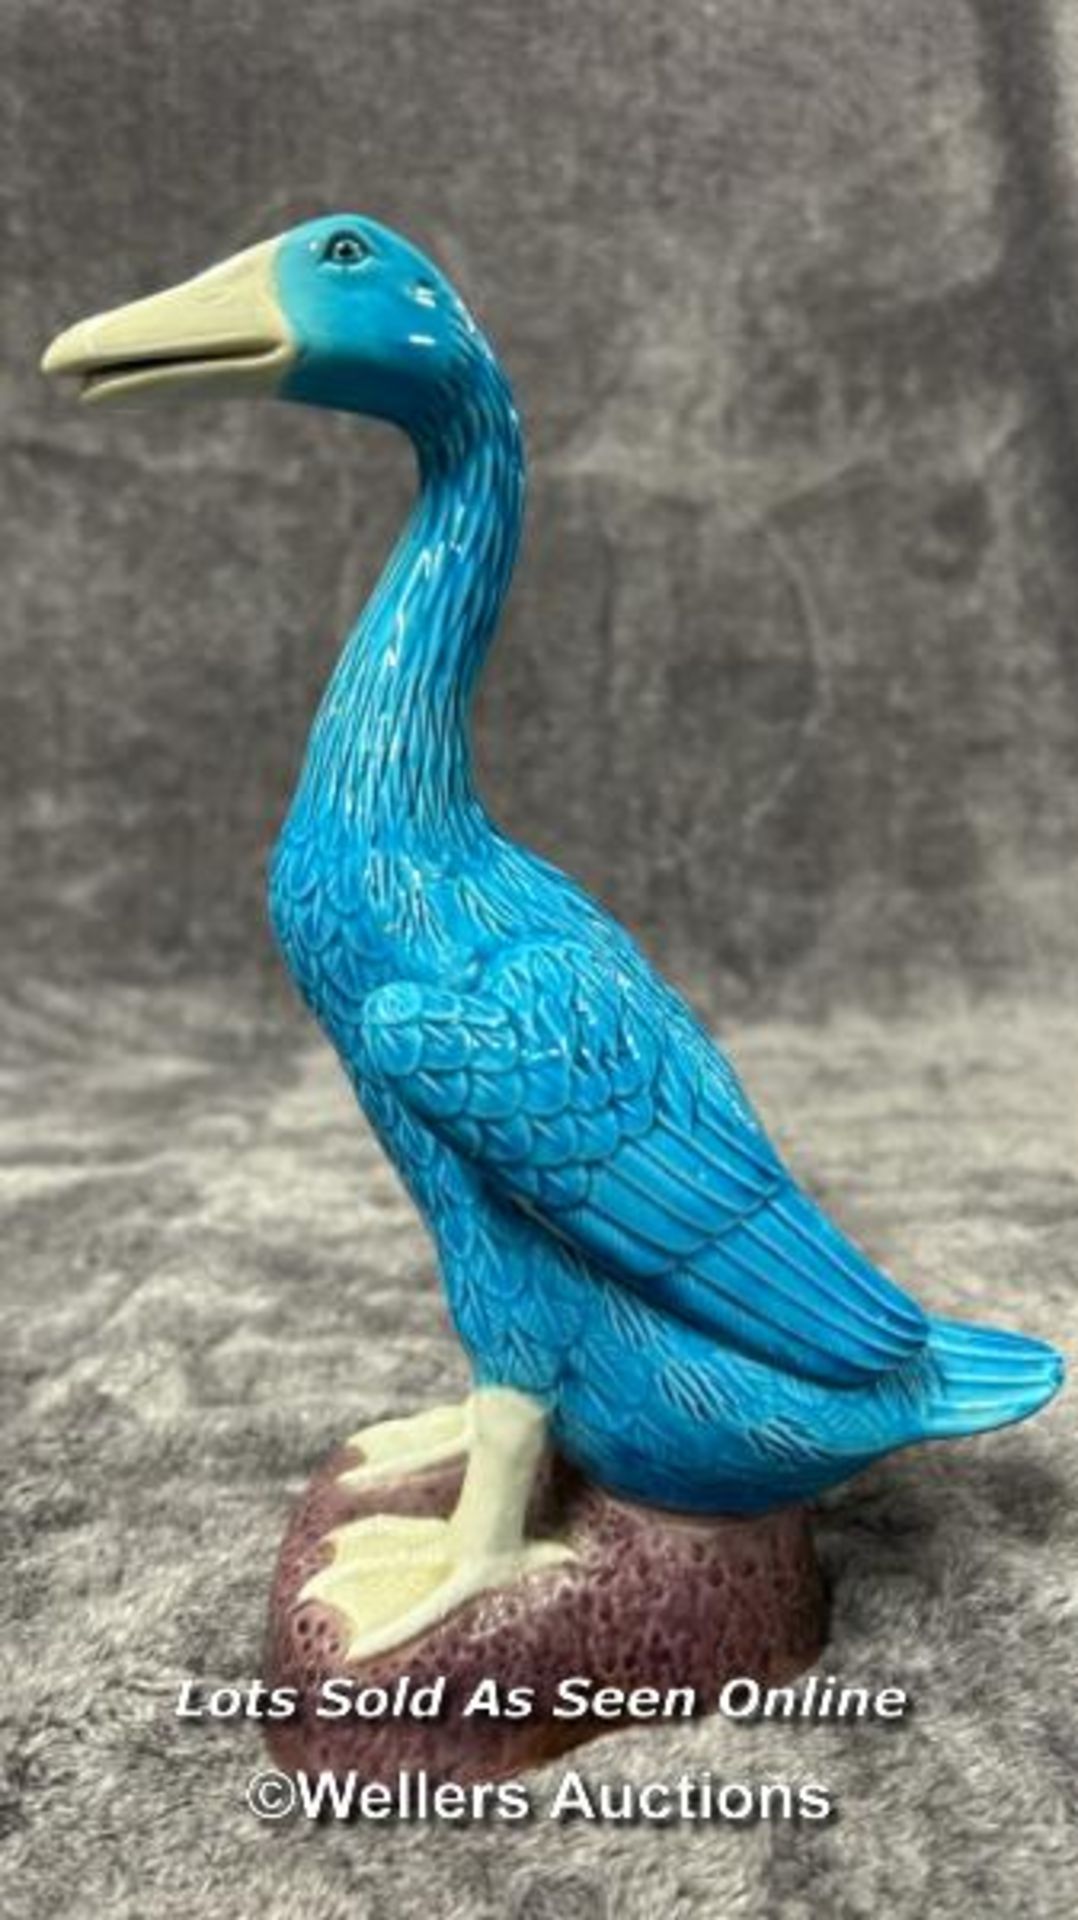 Set of six Chinese turquoise glazed porcelain duck figures, the tallest 29cm high / AN6 - Image 11 of 17